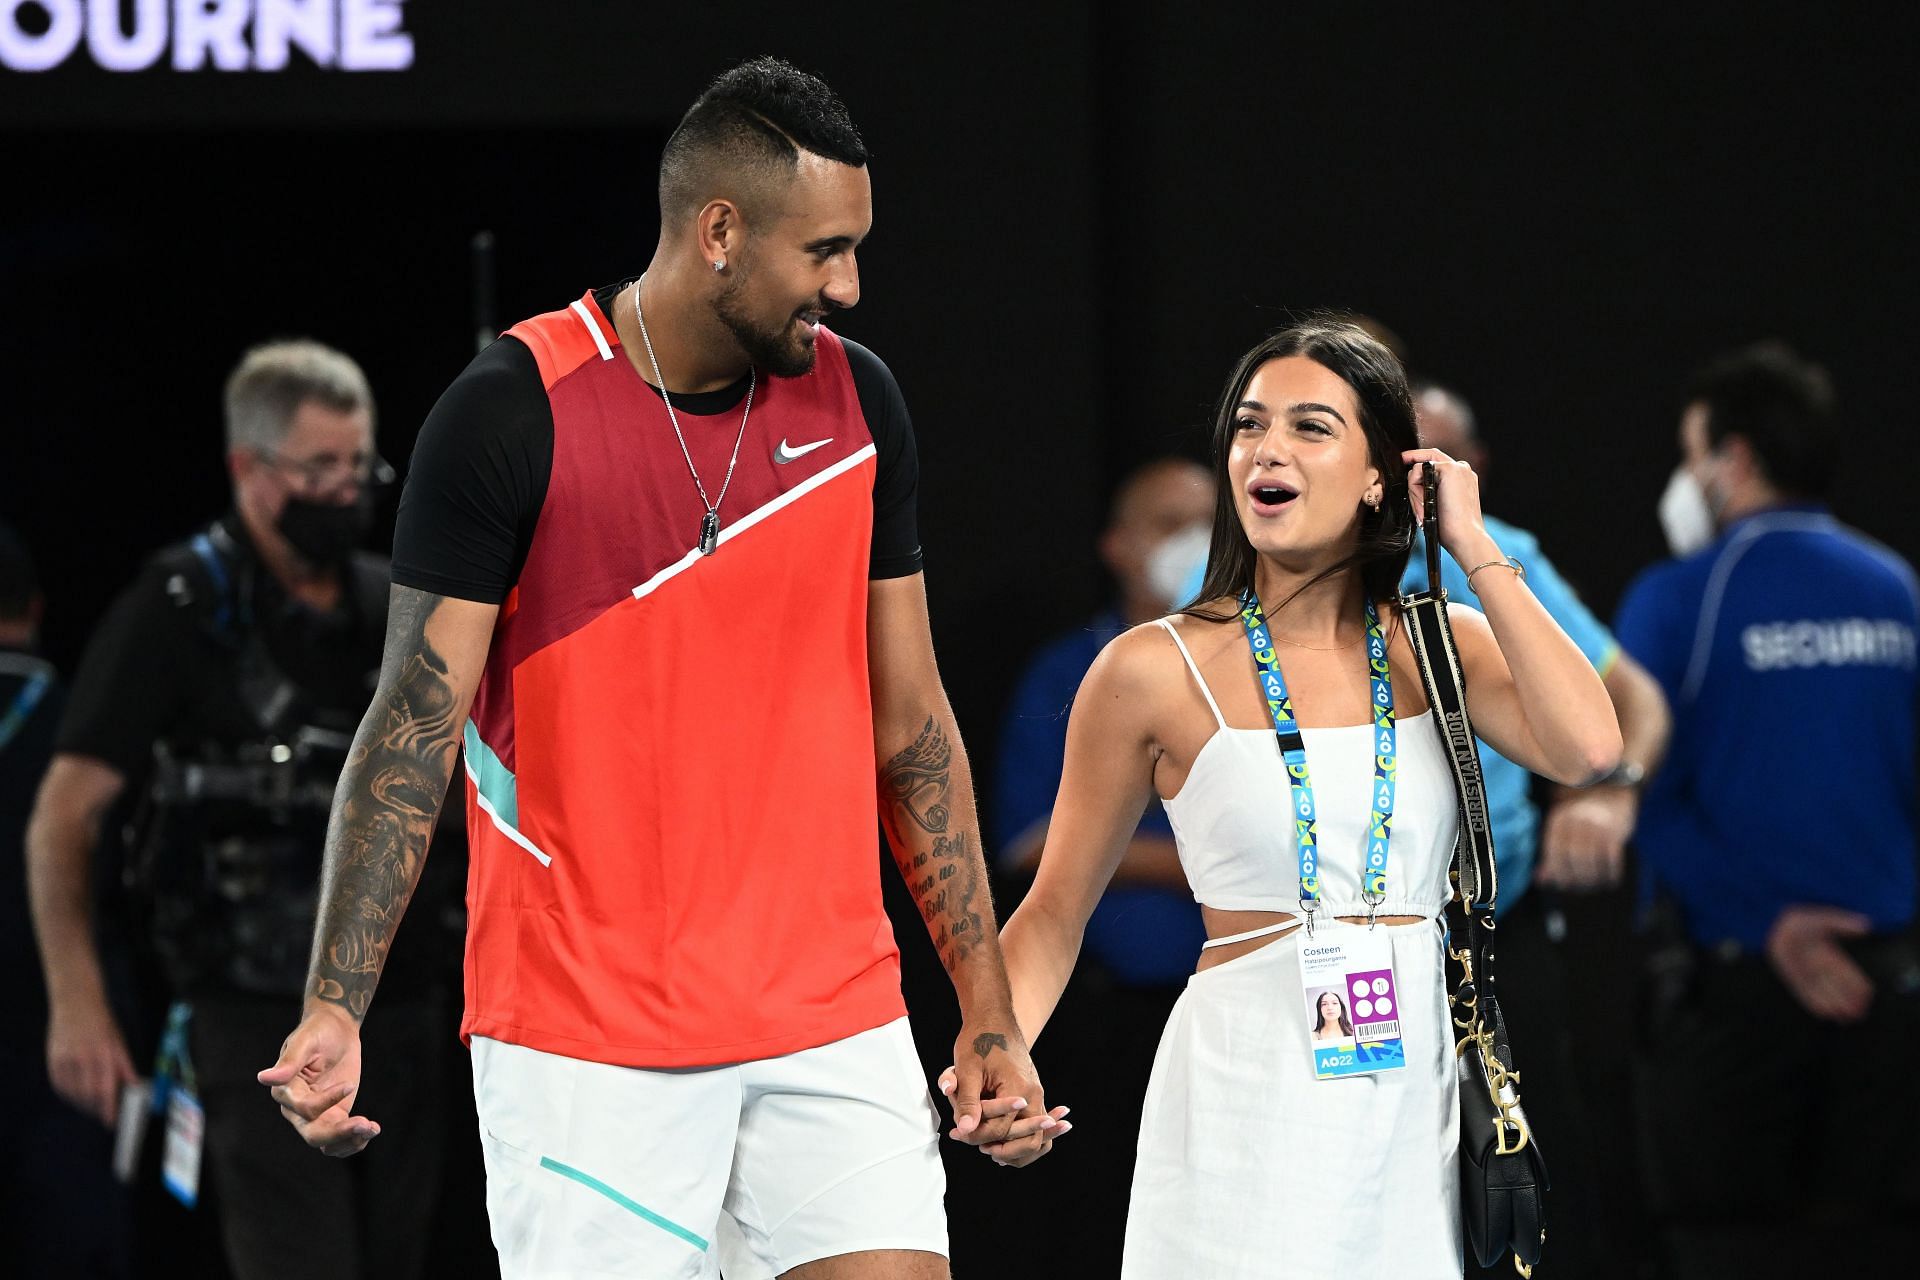 Nick Kyrgios pictured with his girlfriend.